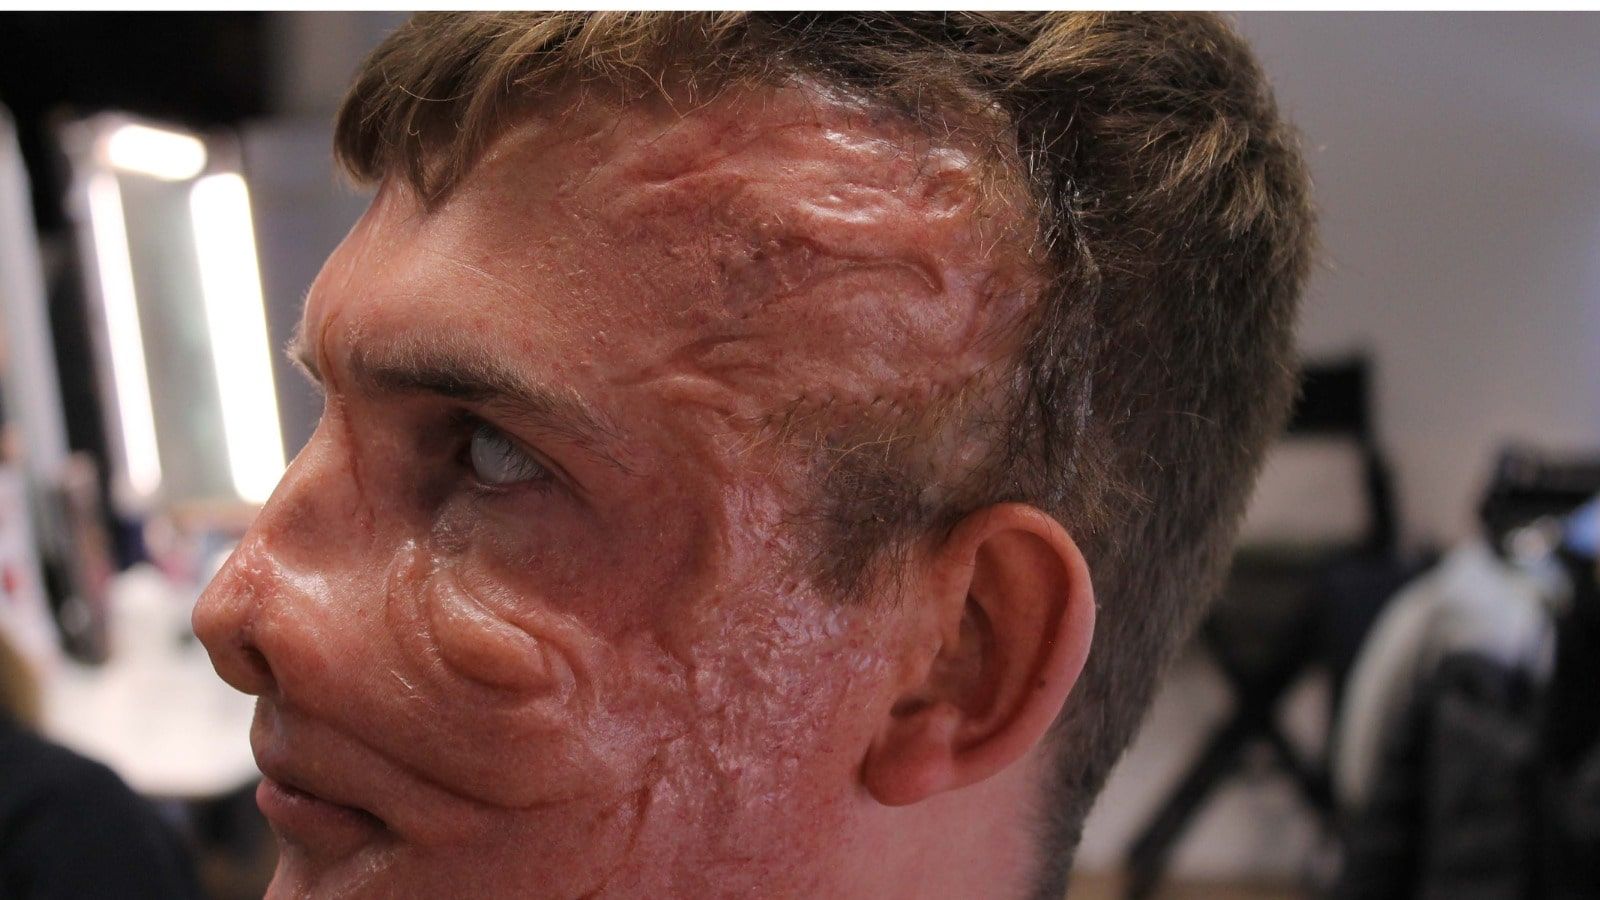 The special effects applied to a volunteers face.